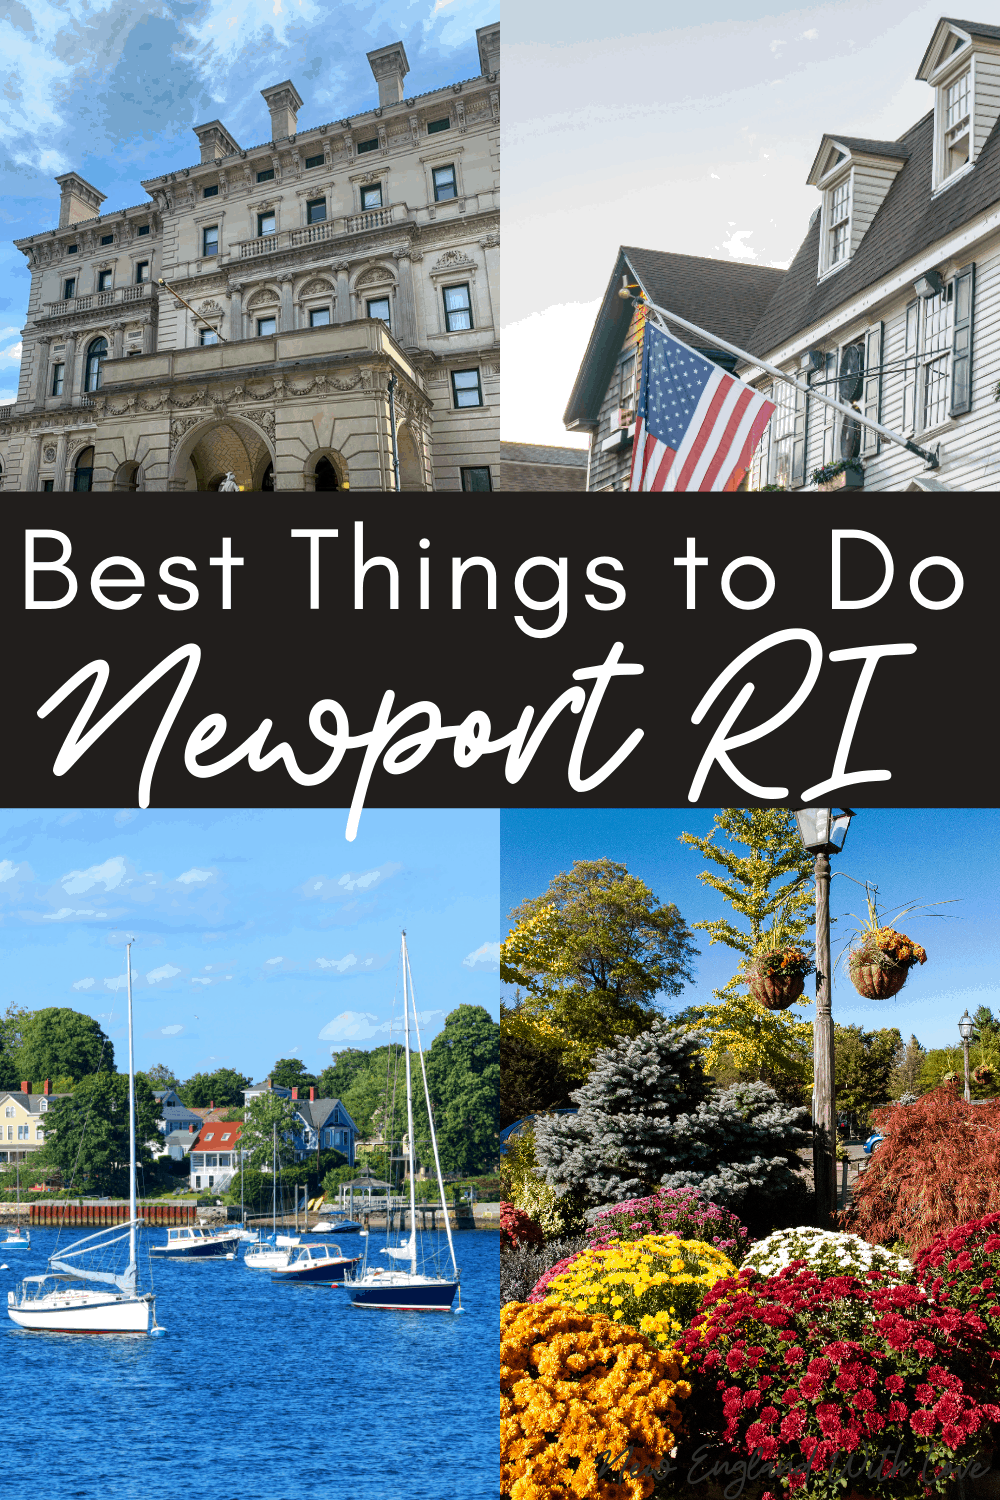 15+ Best Things to Do in Newport RI New England With Love